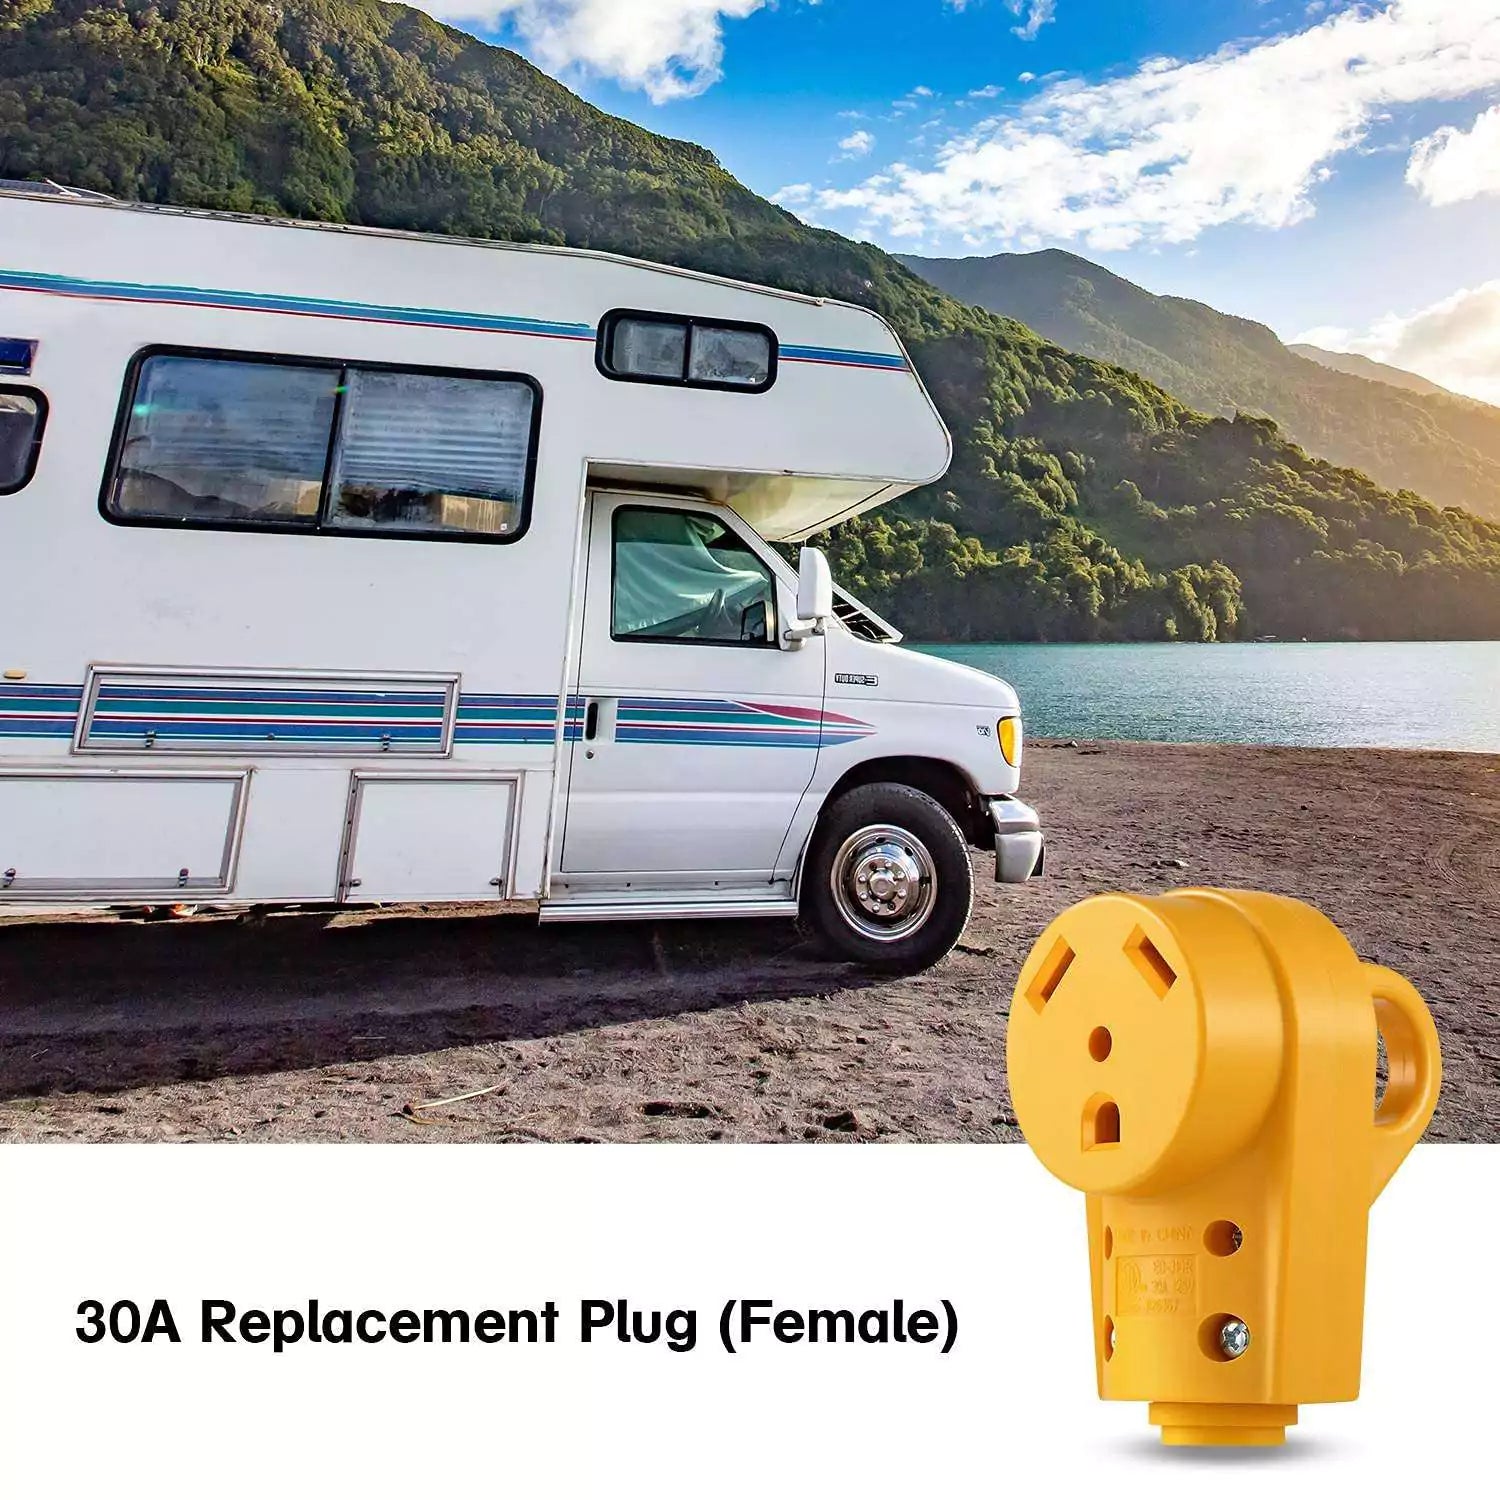 30A replacement plug female